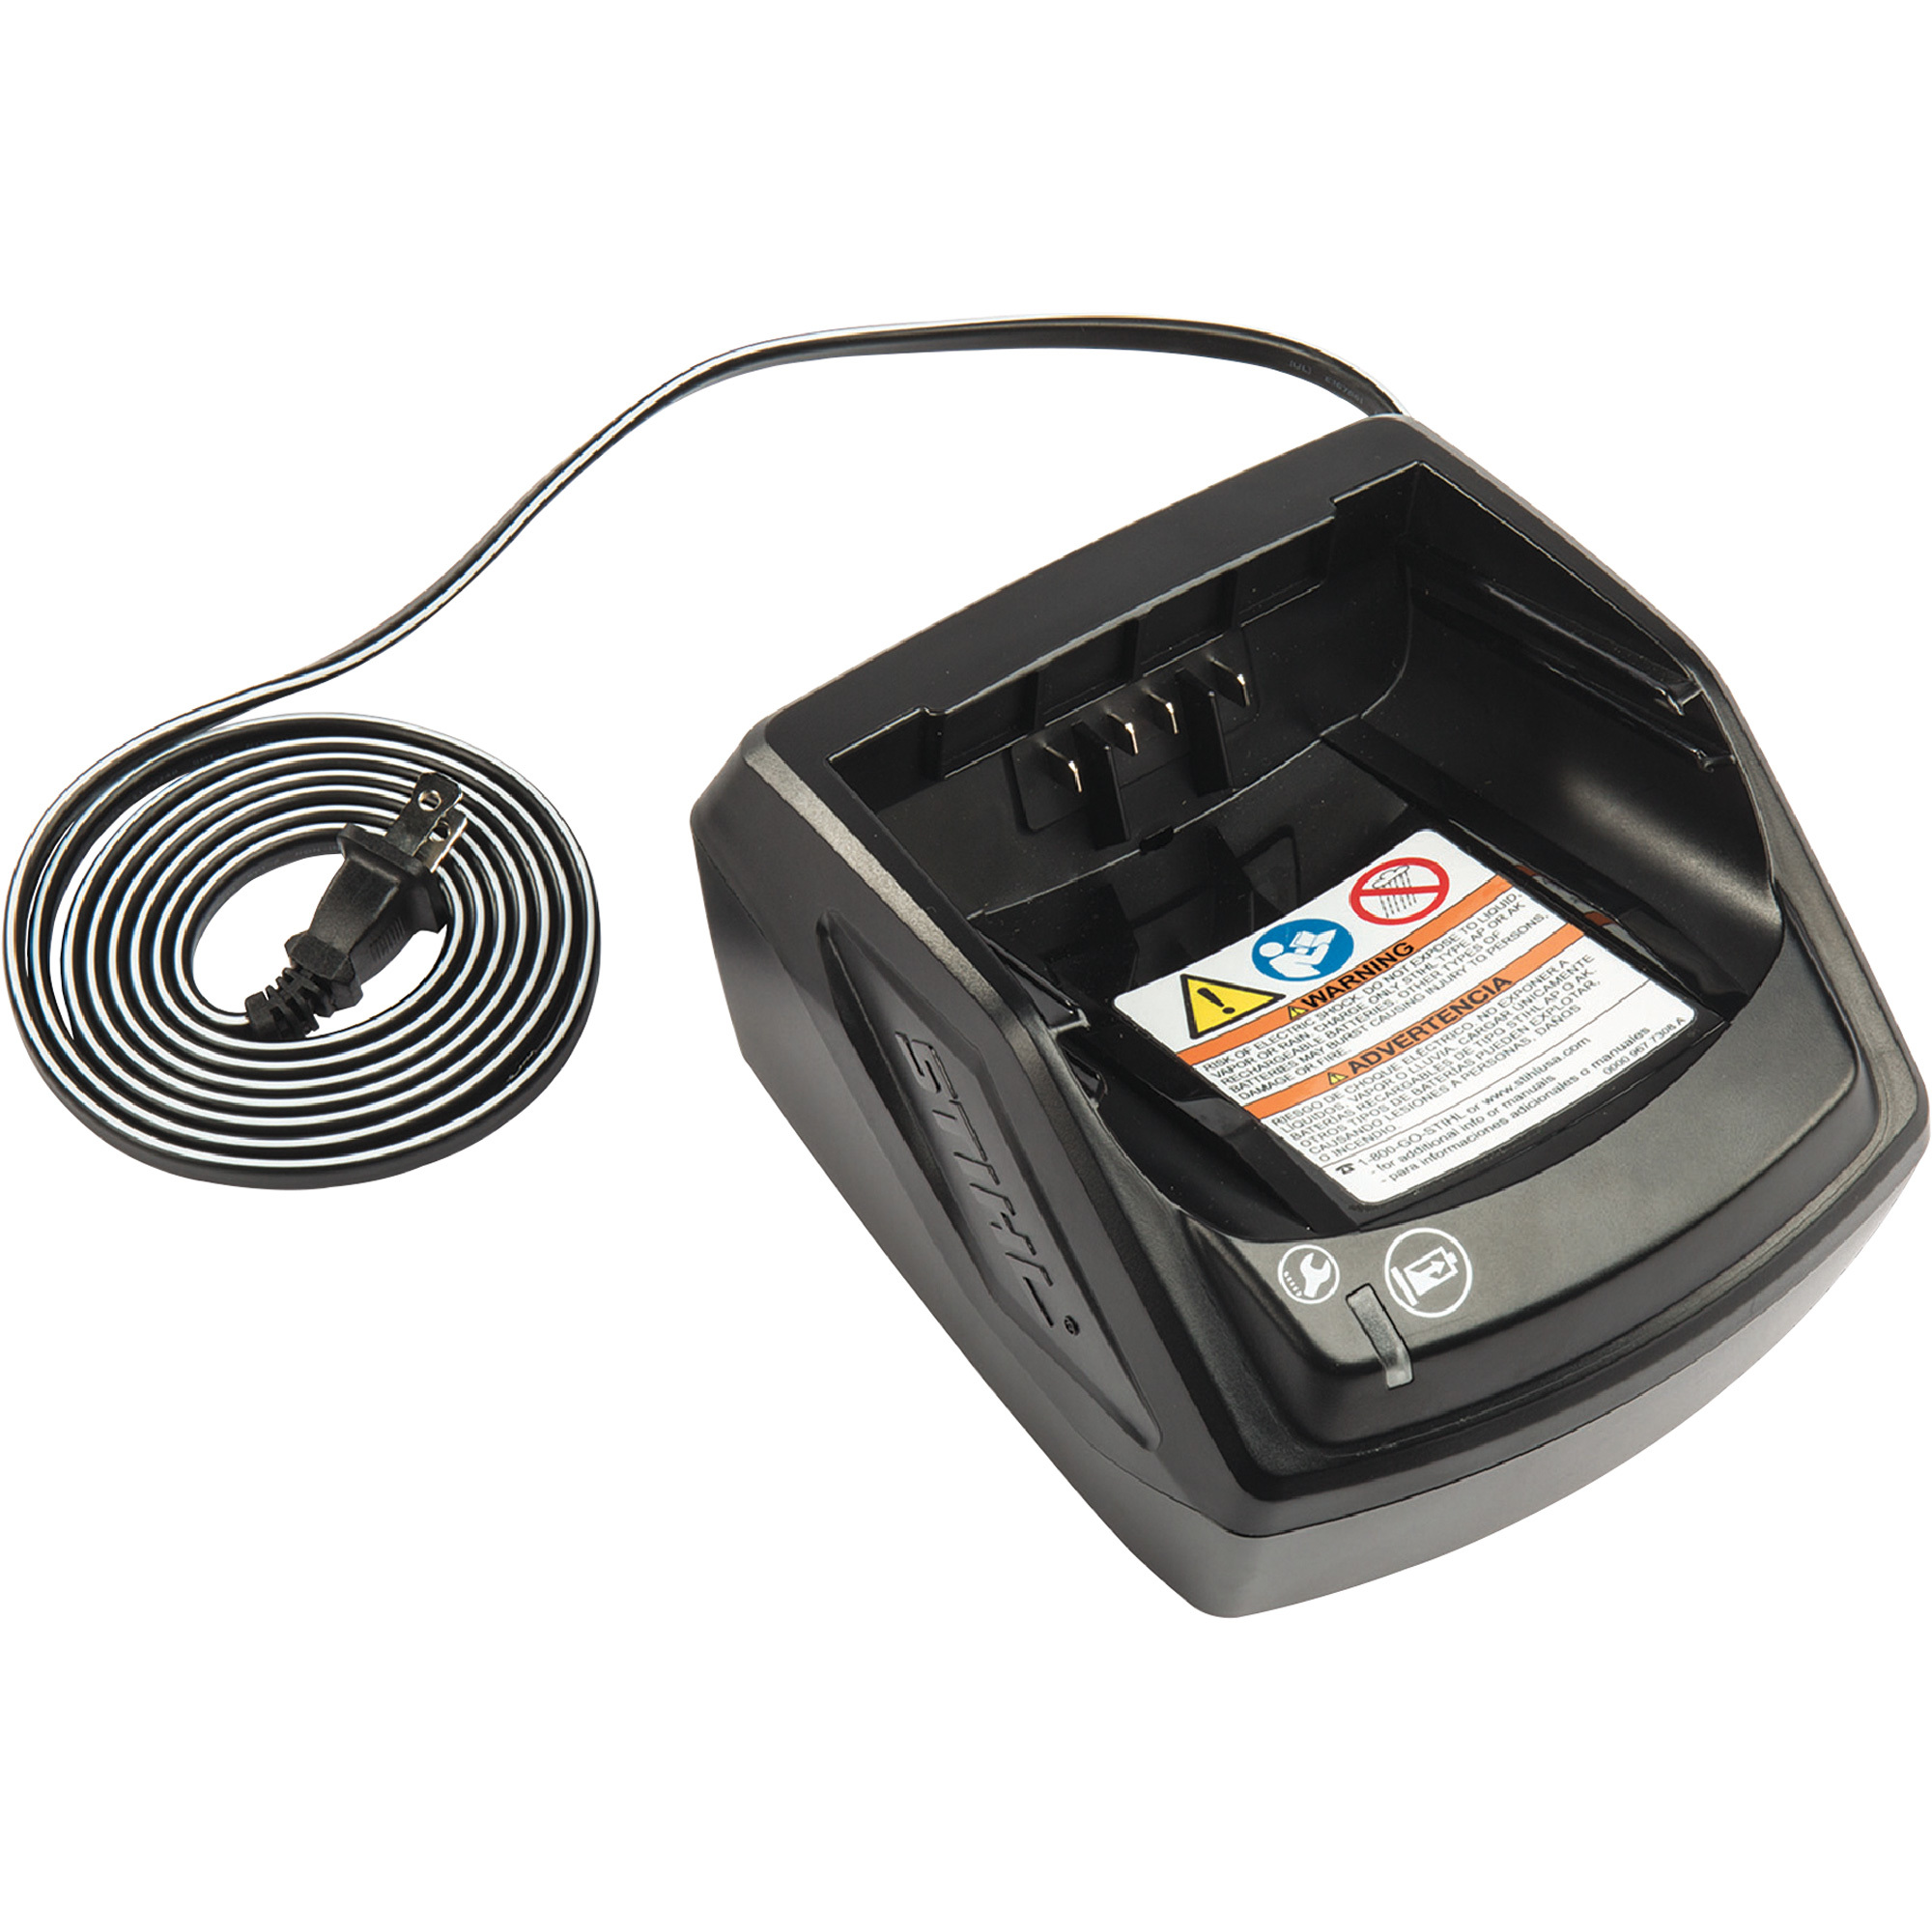 Stihl Lithium-Ion Battery Charger â Model AL 101